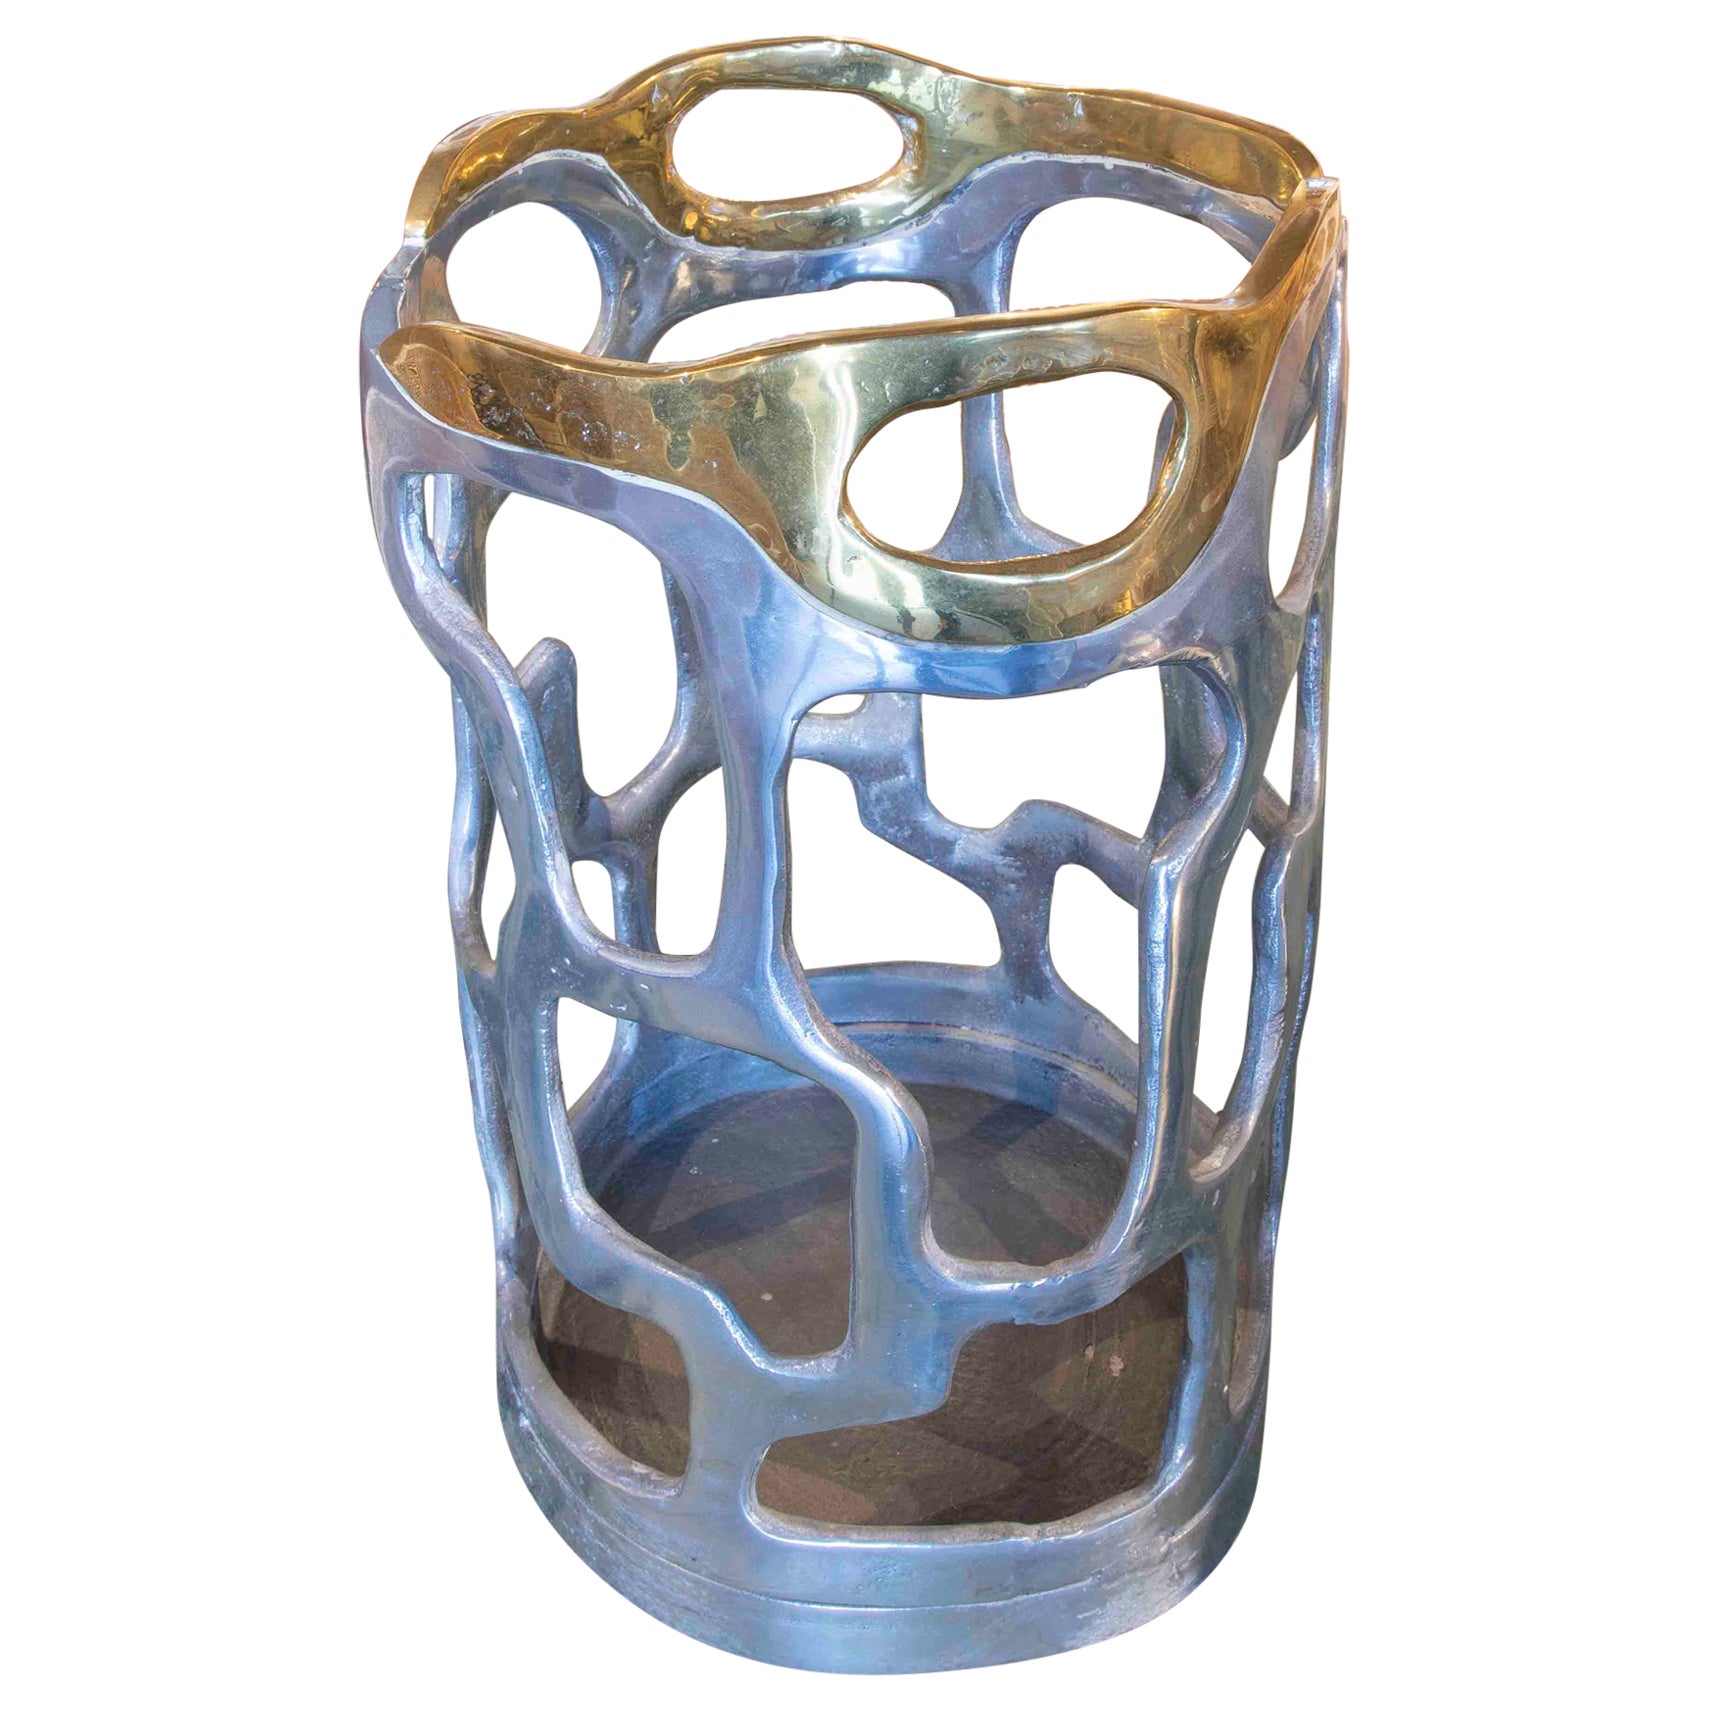 Bronze Umbrella Stand in Gold and Silver Finish by the Artist David Marshall For Sale